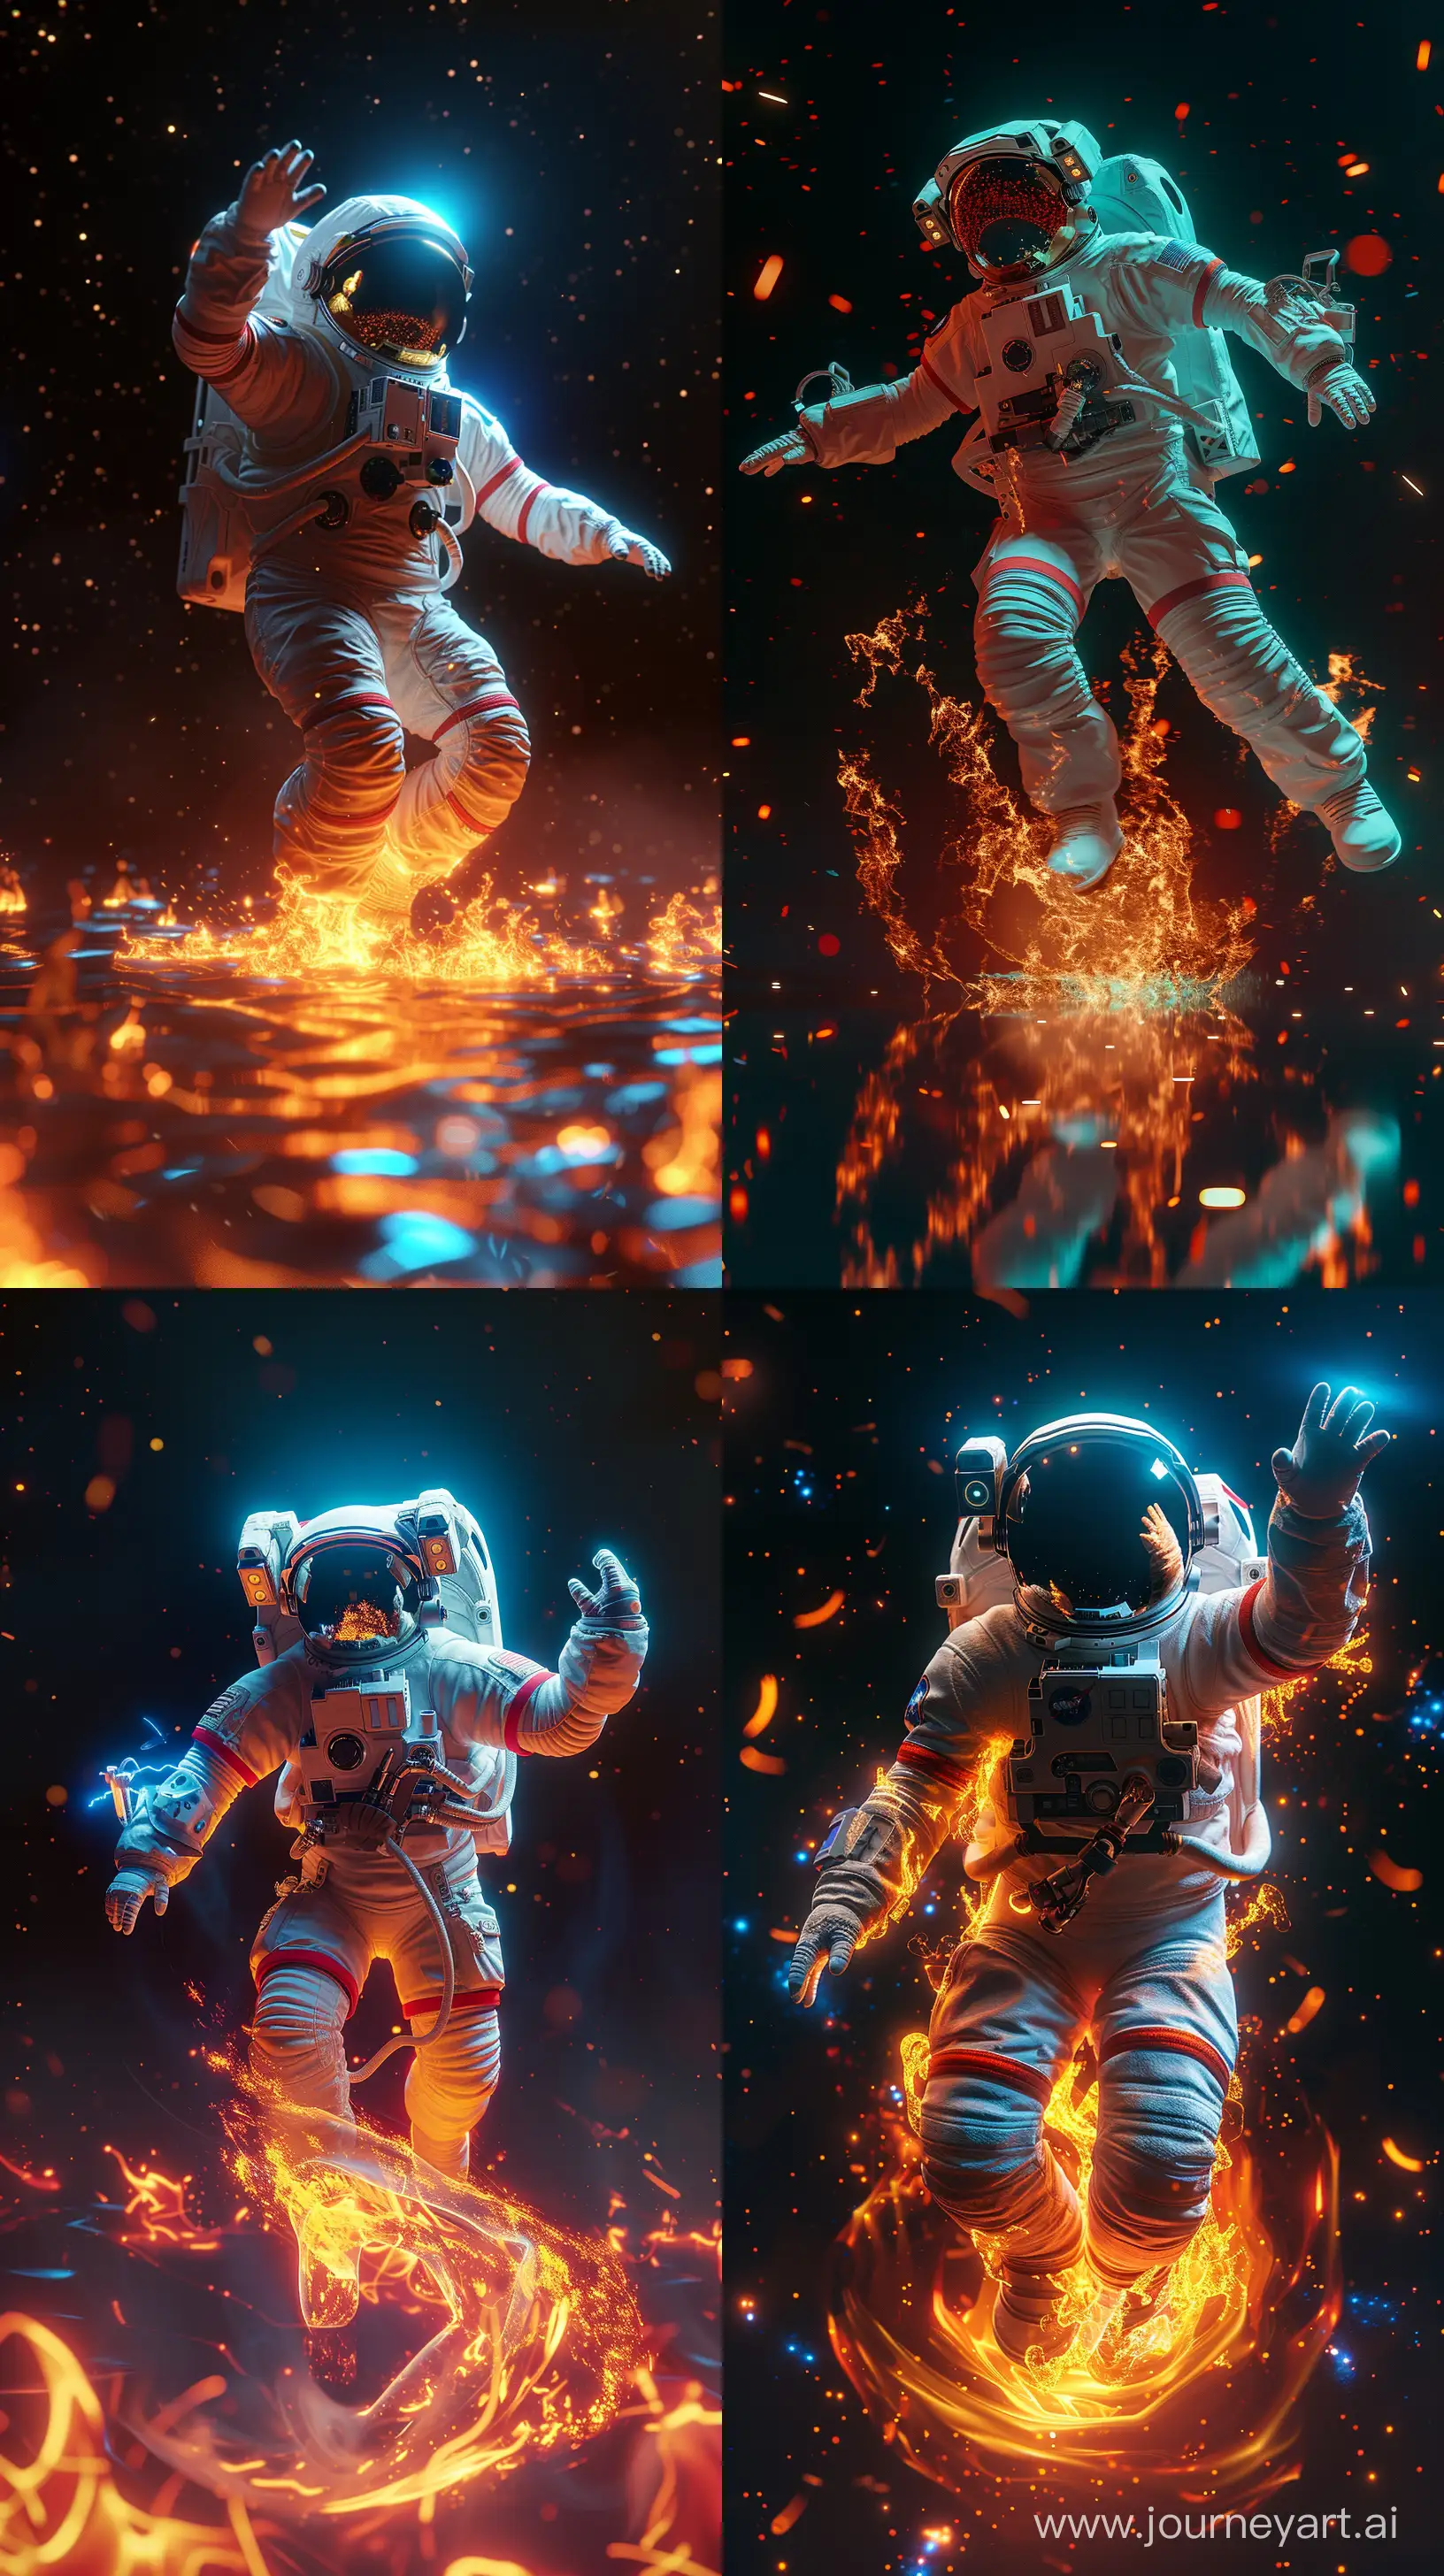 Astronaut-Sinking-and-Walking-on-Fire-in-Space-Stylish-Intense-and-Mystical-Desertwave-Adventure